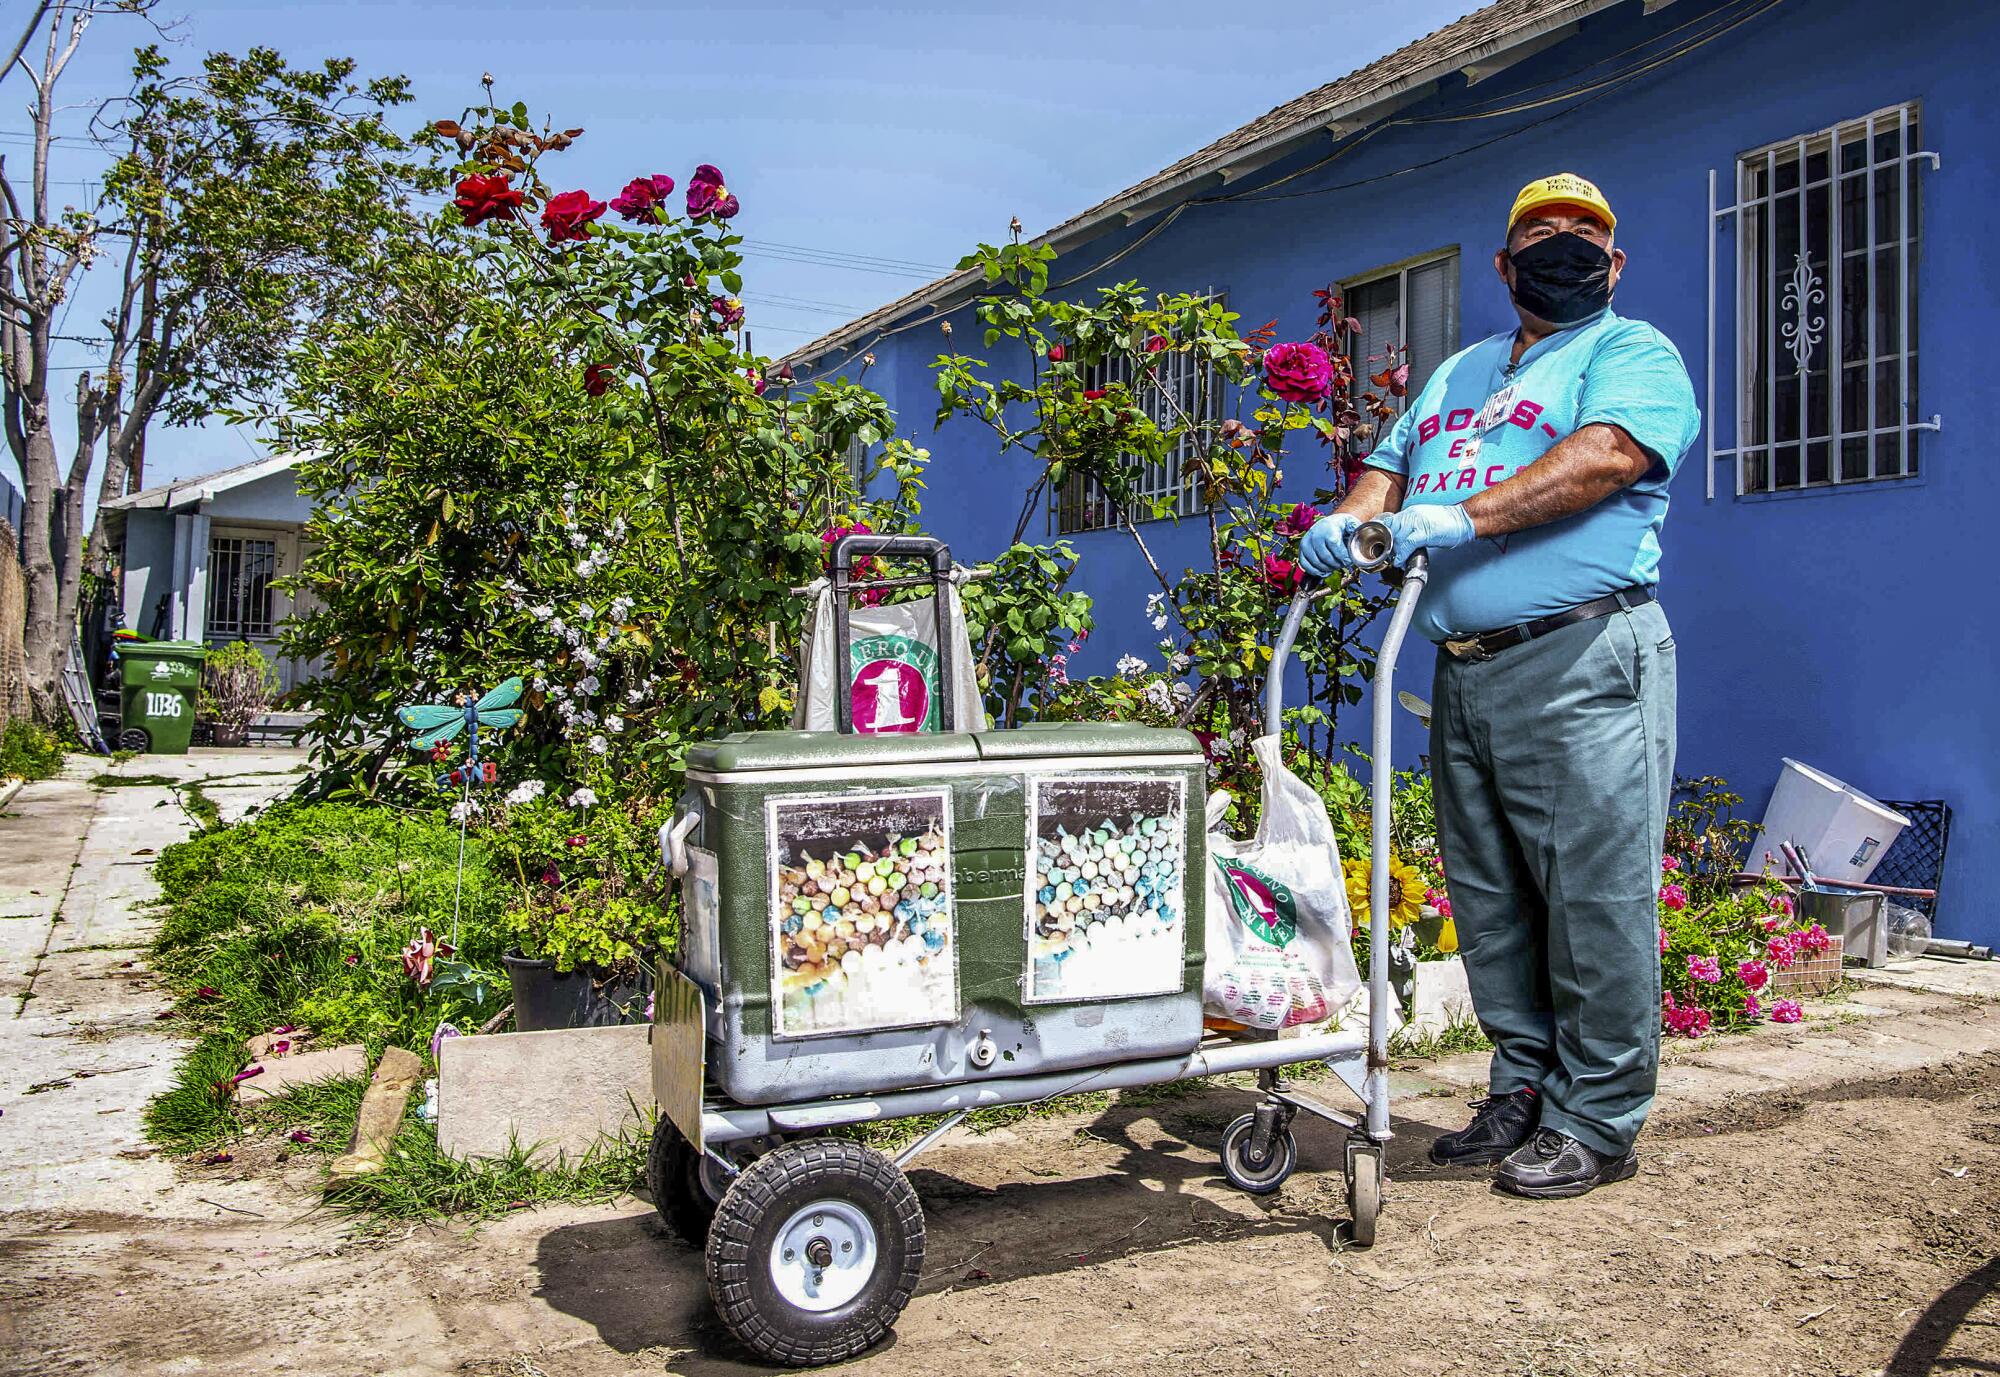 Faustino Martinez with a pushcart.